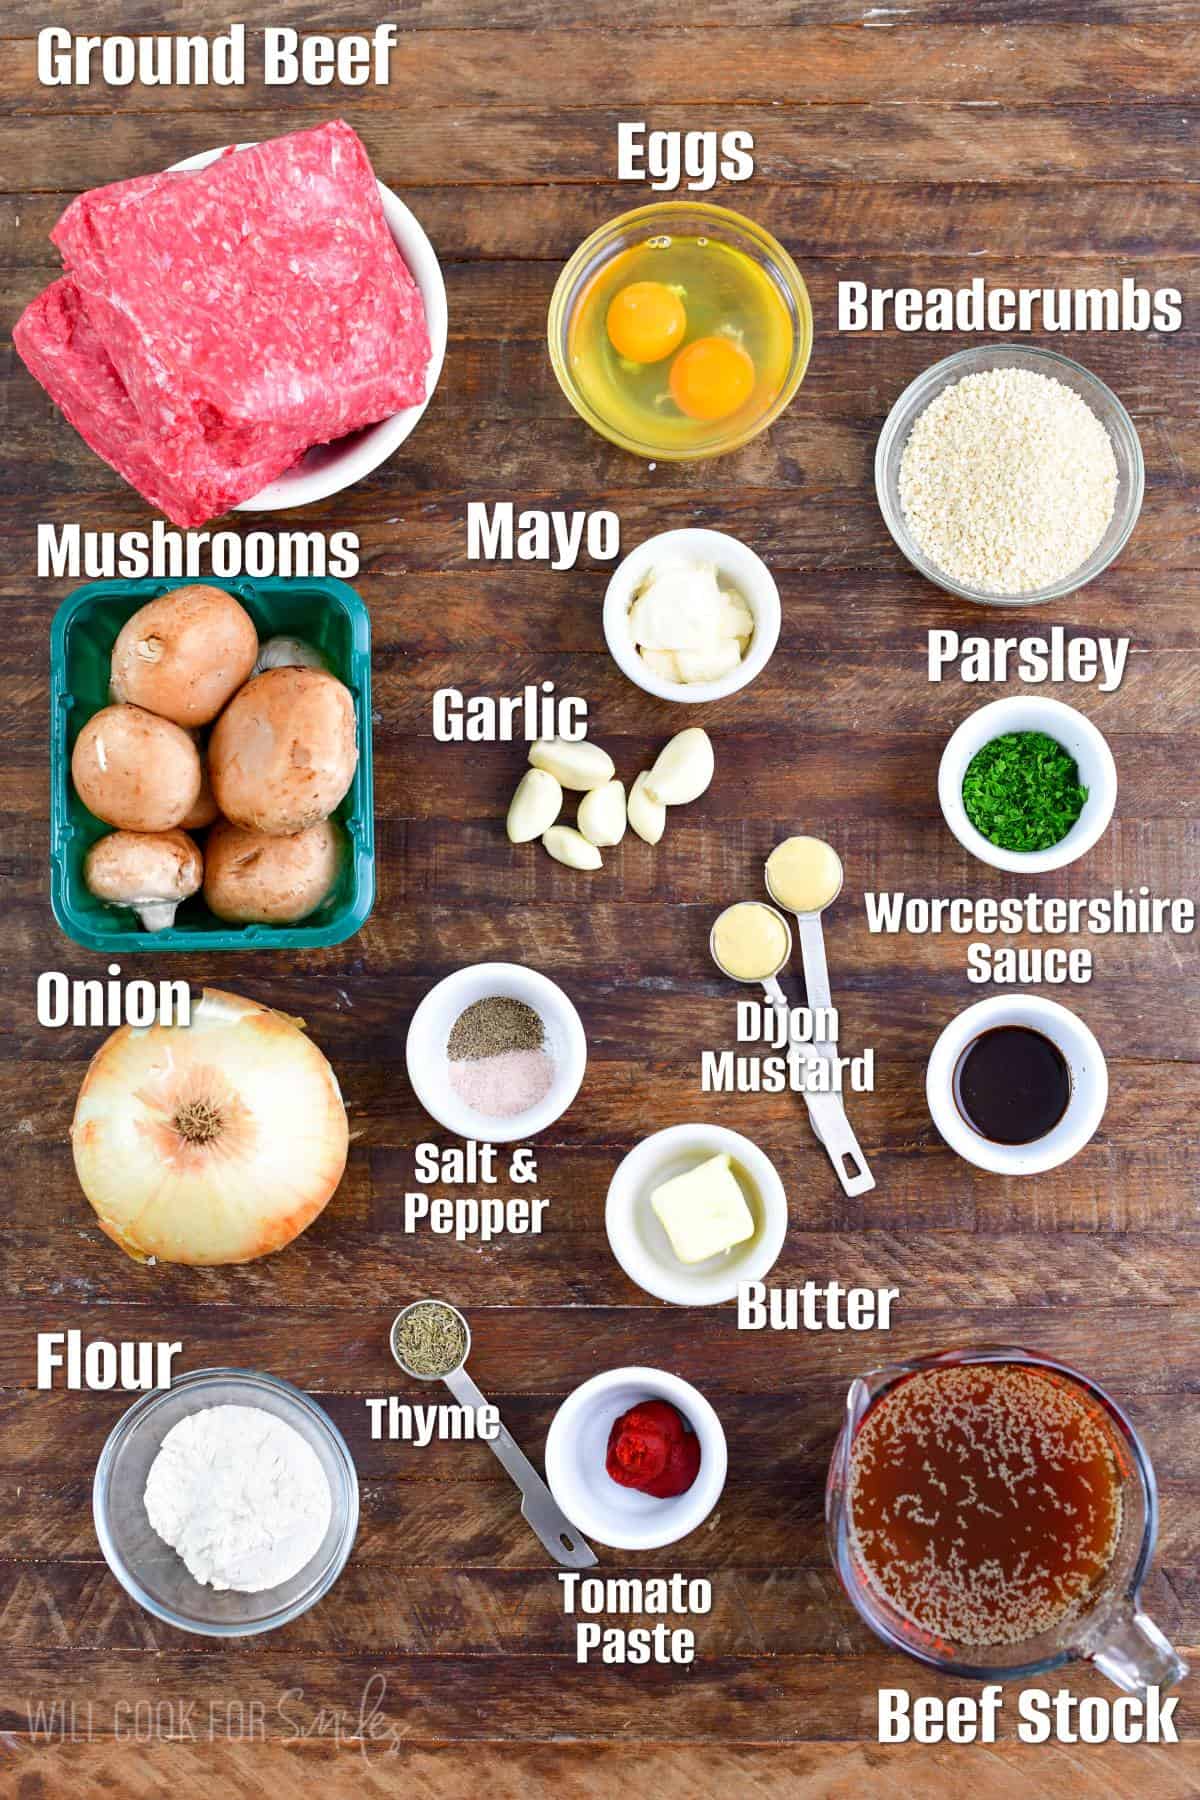 Labeled ingredients for Salisbury Steak and gravy on a wood surface.